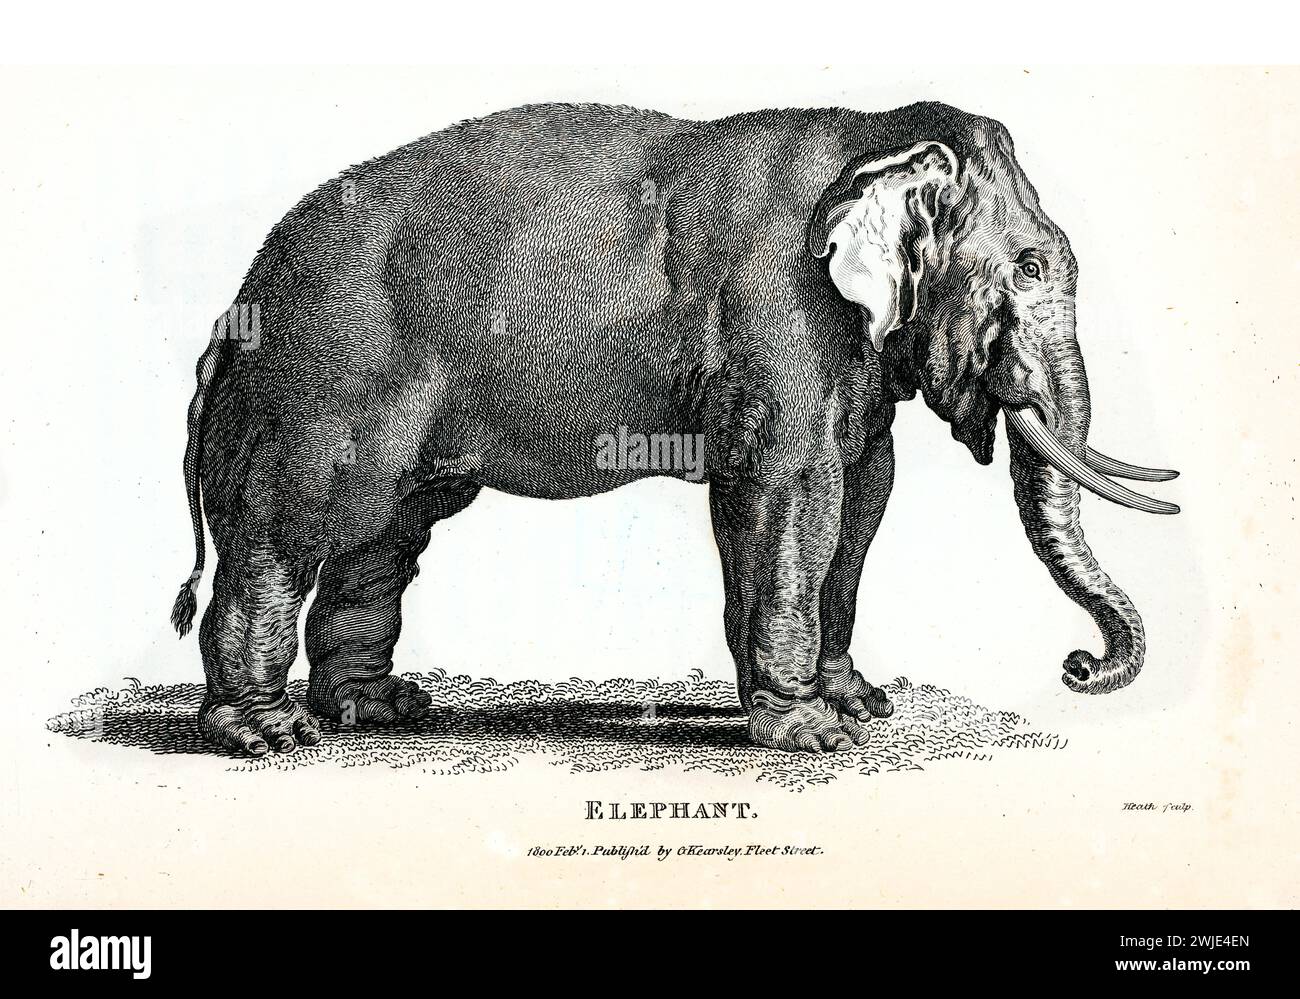 Old engraved illustration of Elephant. Created by George Shaw, published in Zoological Lectures, London, 1809. Stock Photo